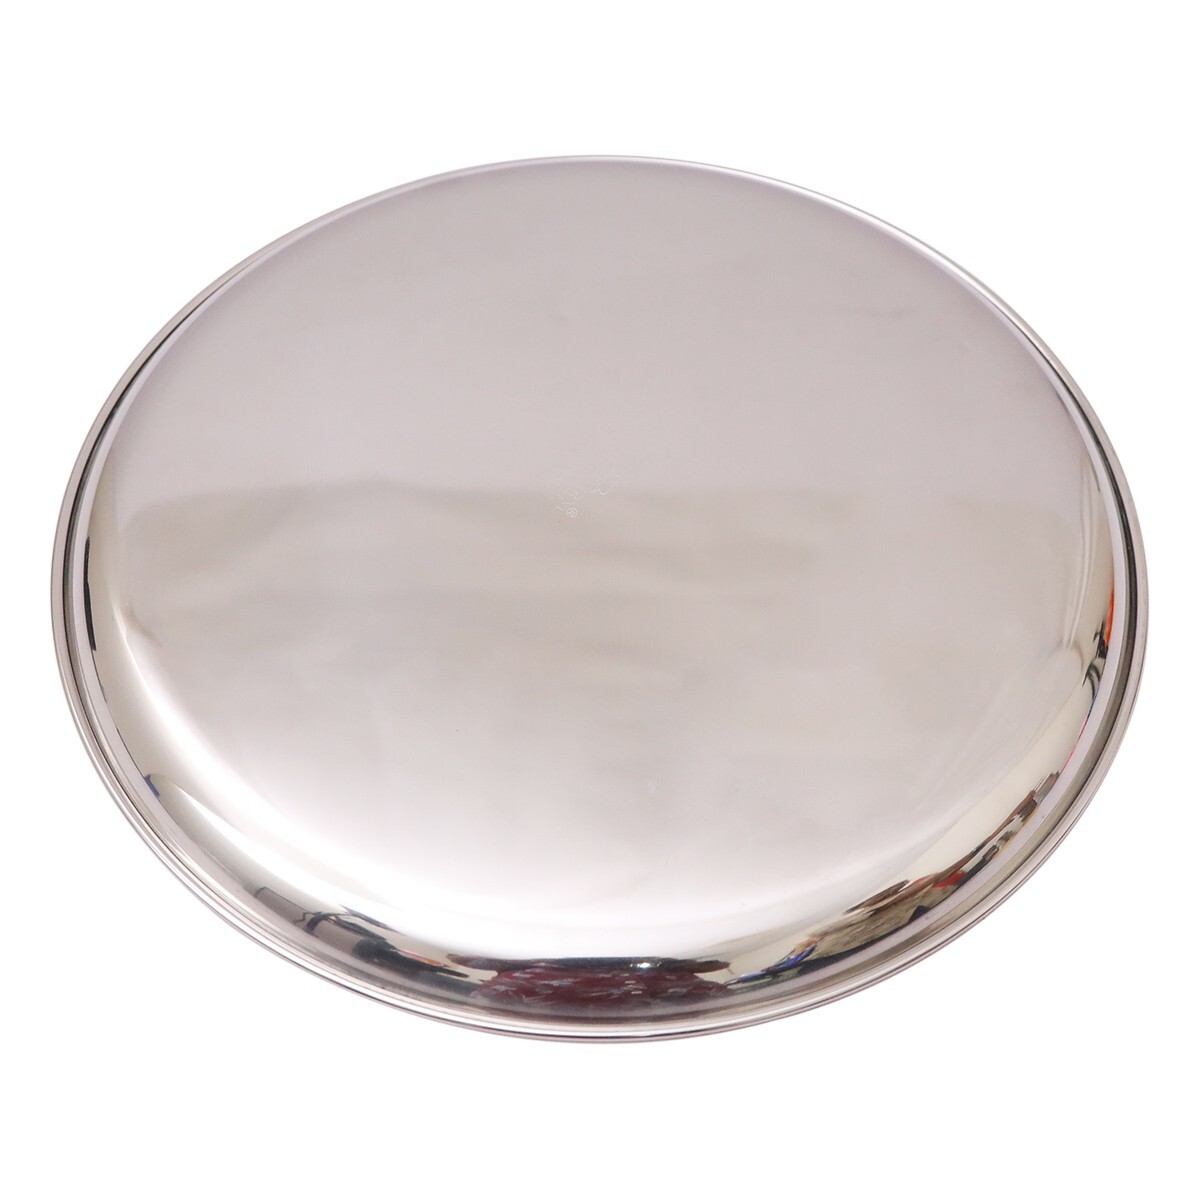 Kitchen Essential China Plate Stainless Steel 12"